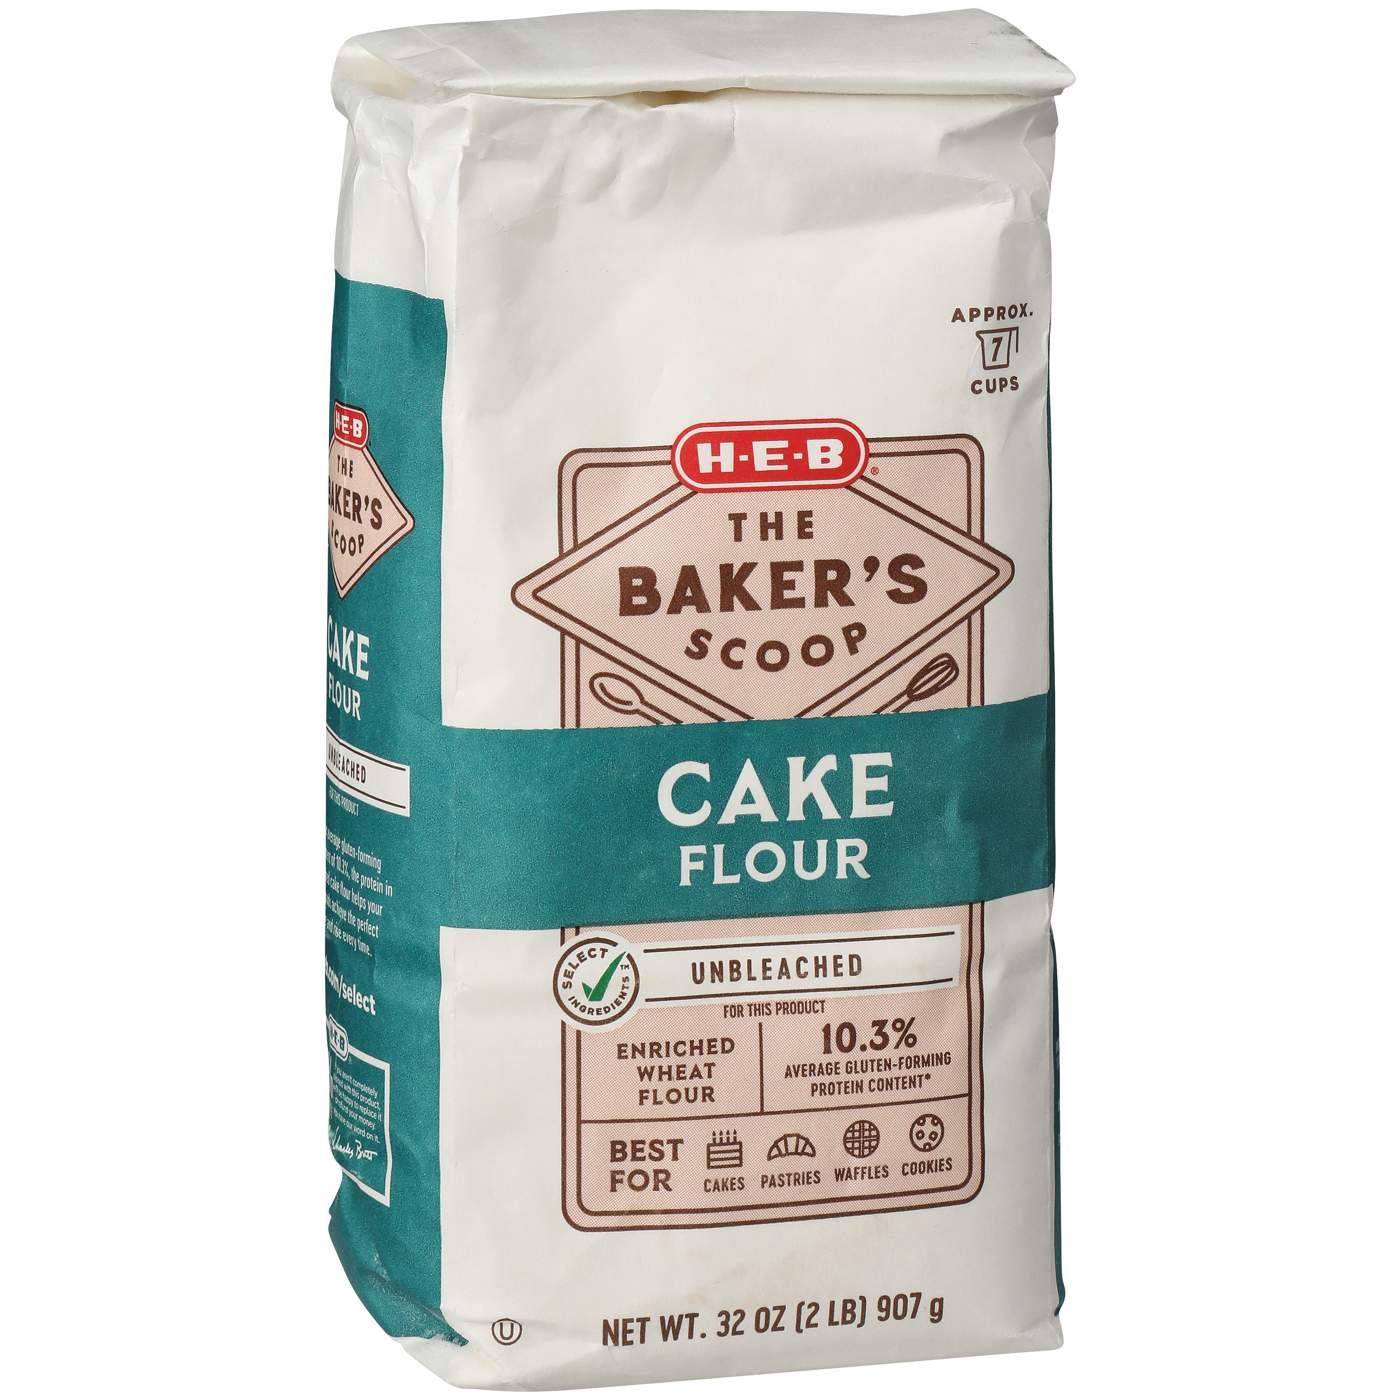 H-E-B The Baker's Scoop Unbleached Cake Flour; image 2 of 2